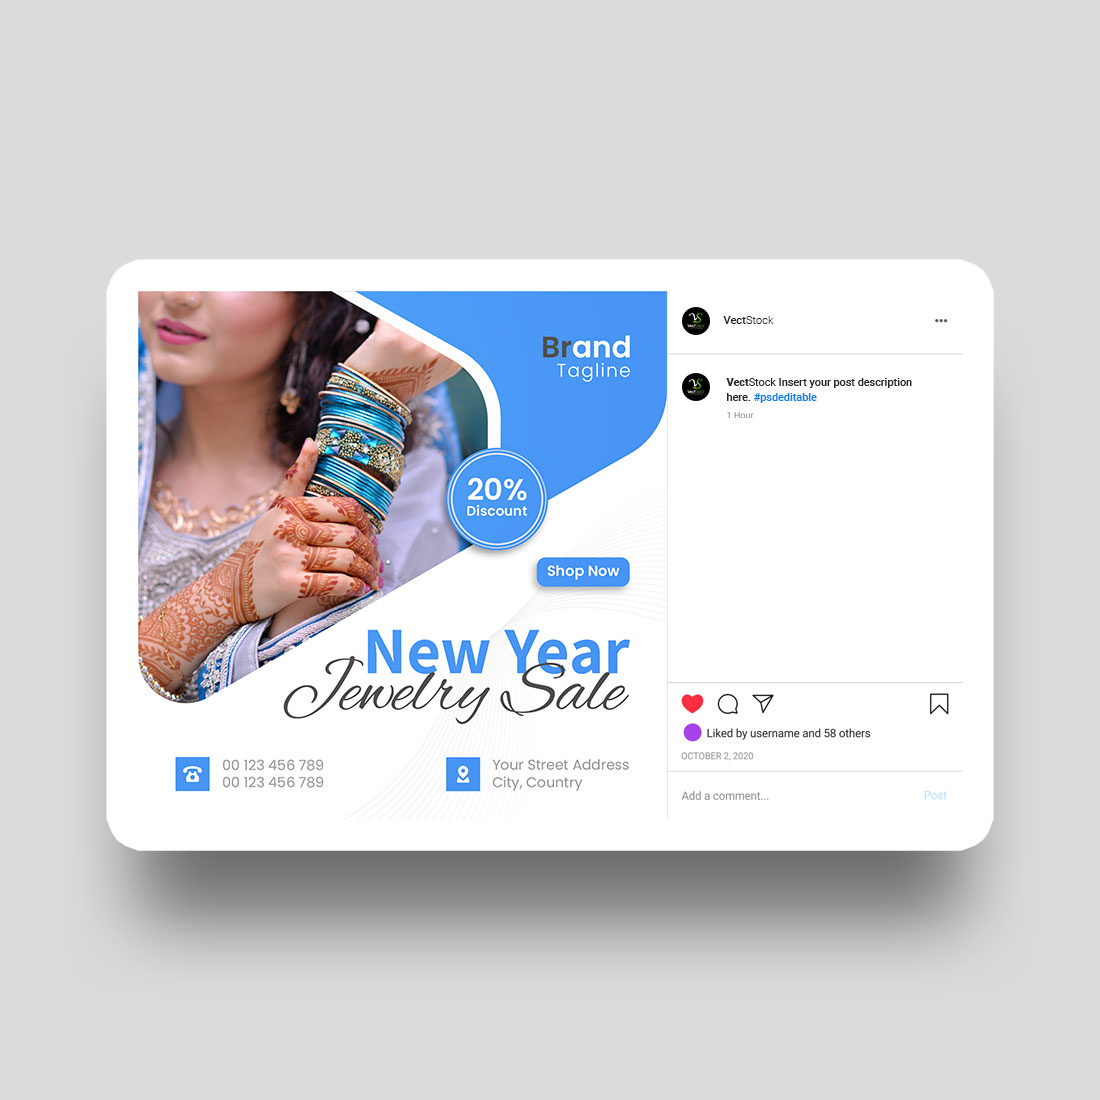 Jewelry sale store promo social media instagram post banner template cover image.